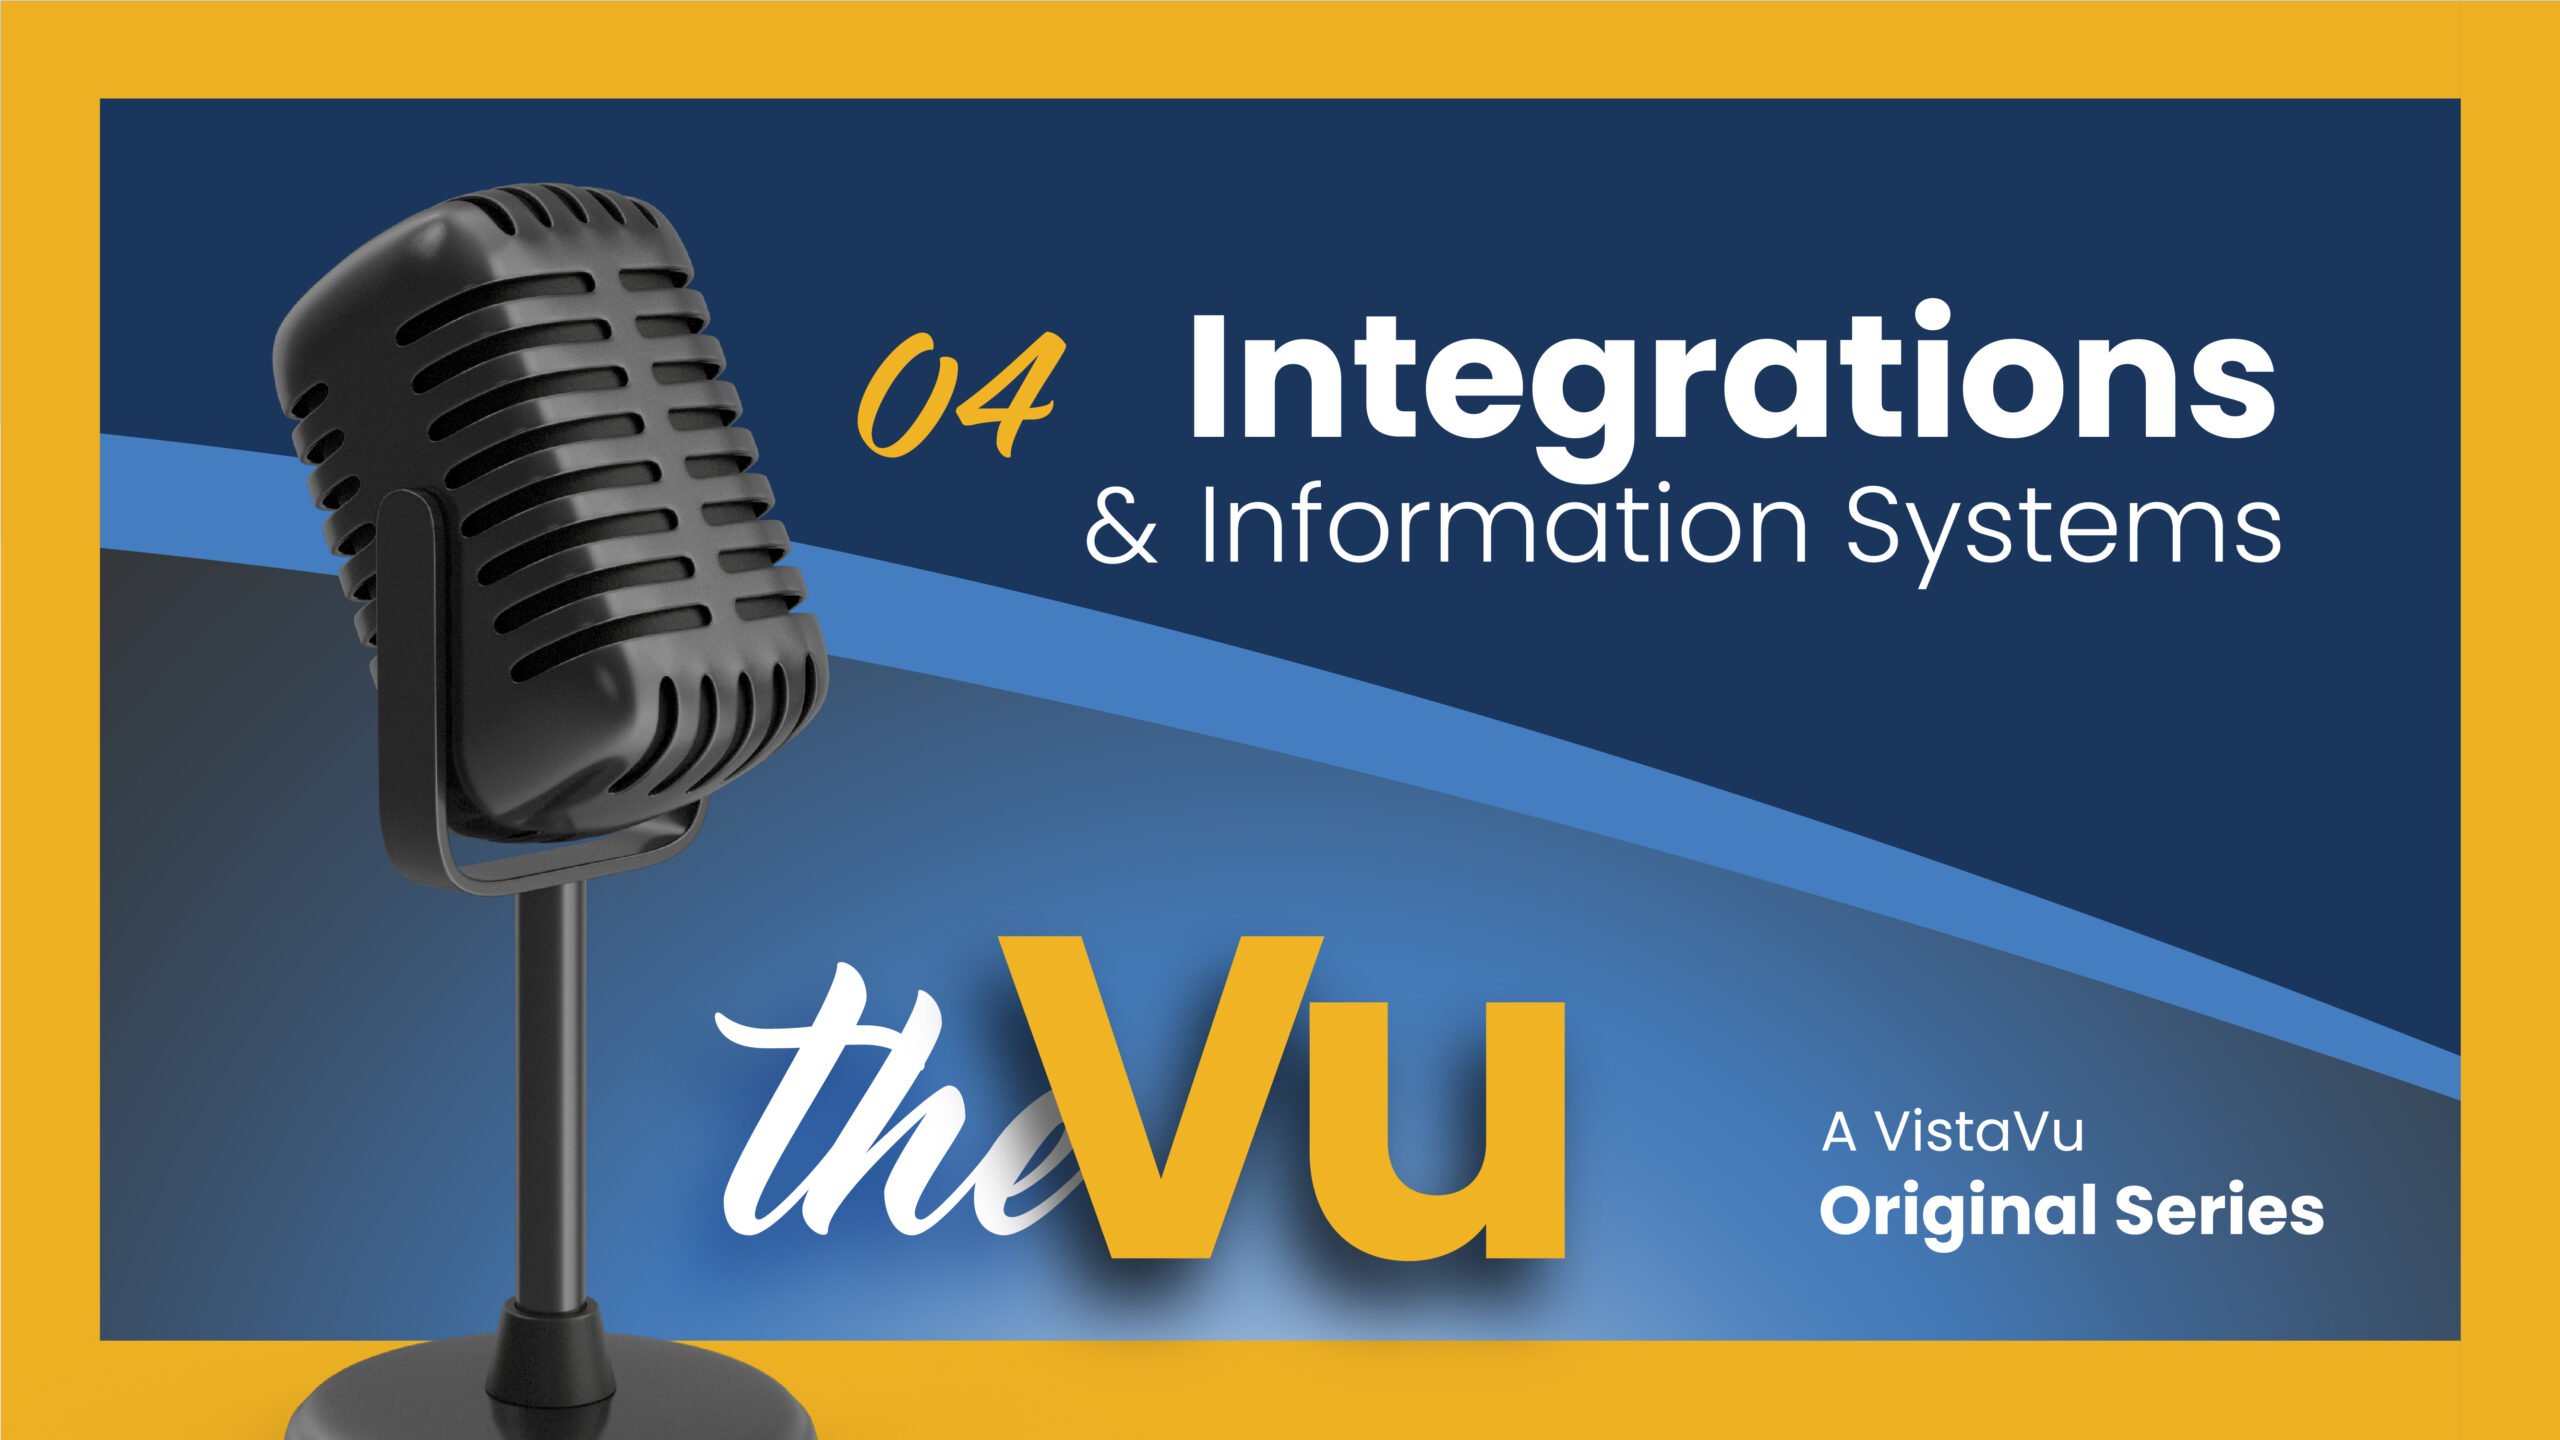 Integrations & Information Systems | Ep 4 | The Vu